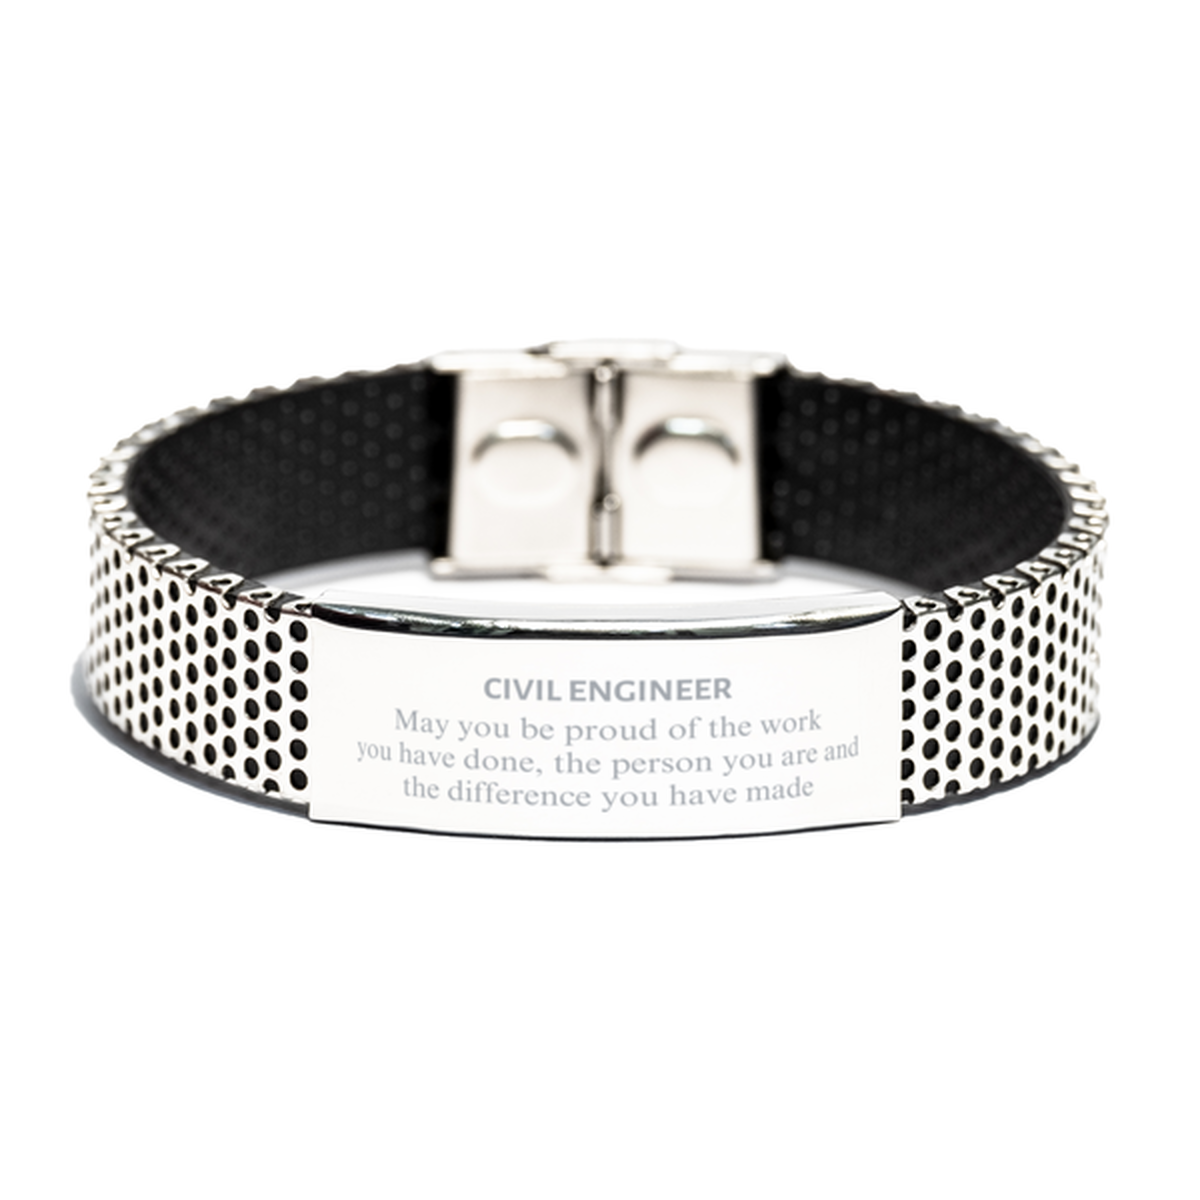 Civil Engineer May you be proud of the work you have done, Retirement Civil Engineer Stainless Steel Bracelet for Colleague Appreciation Gifts Amazing for Civil Engineer